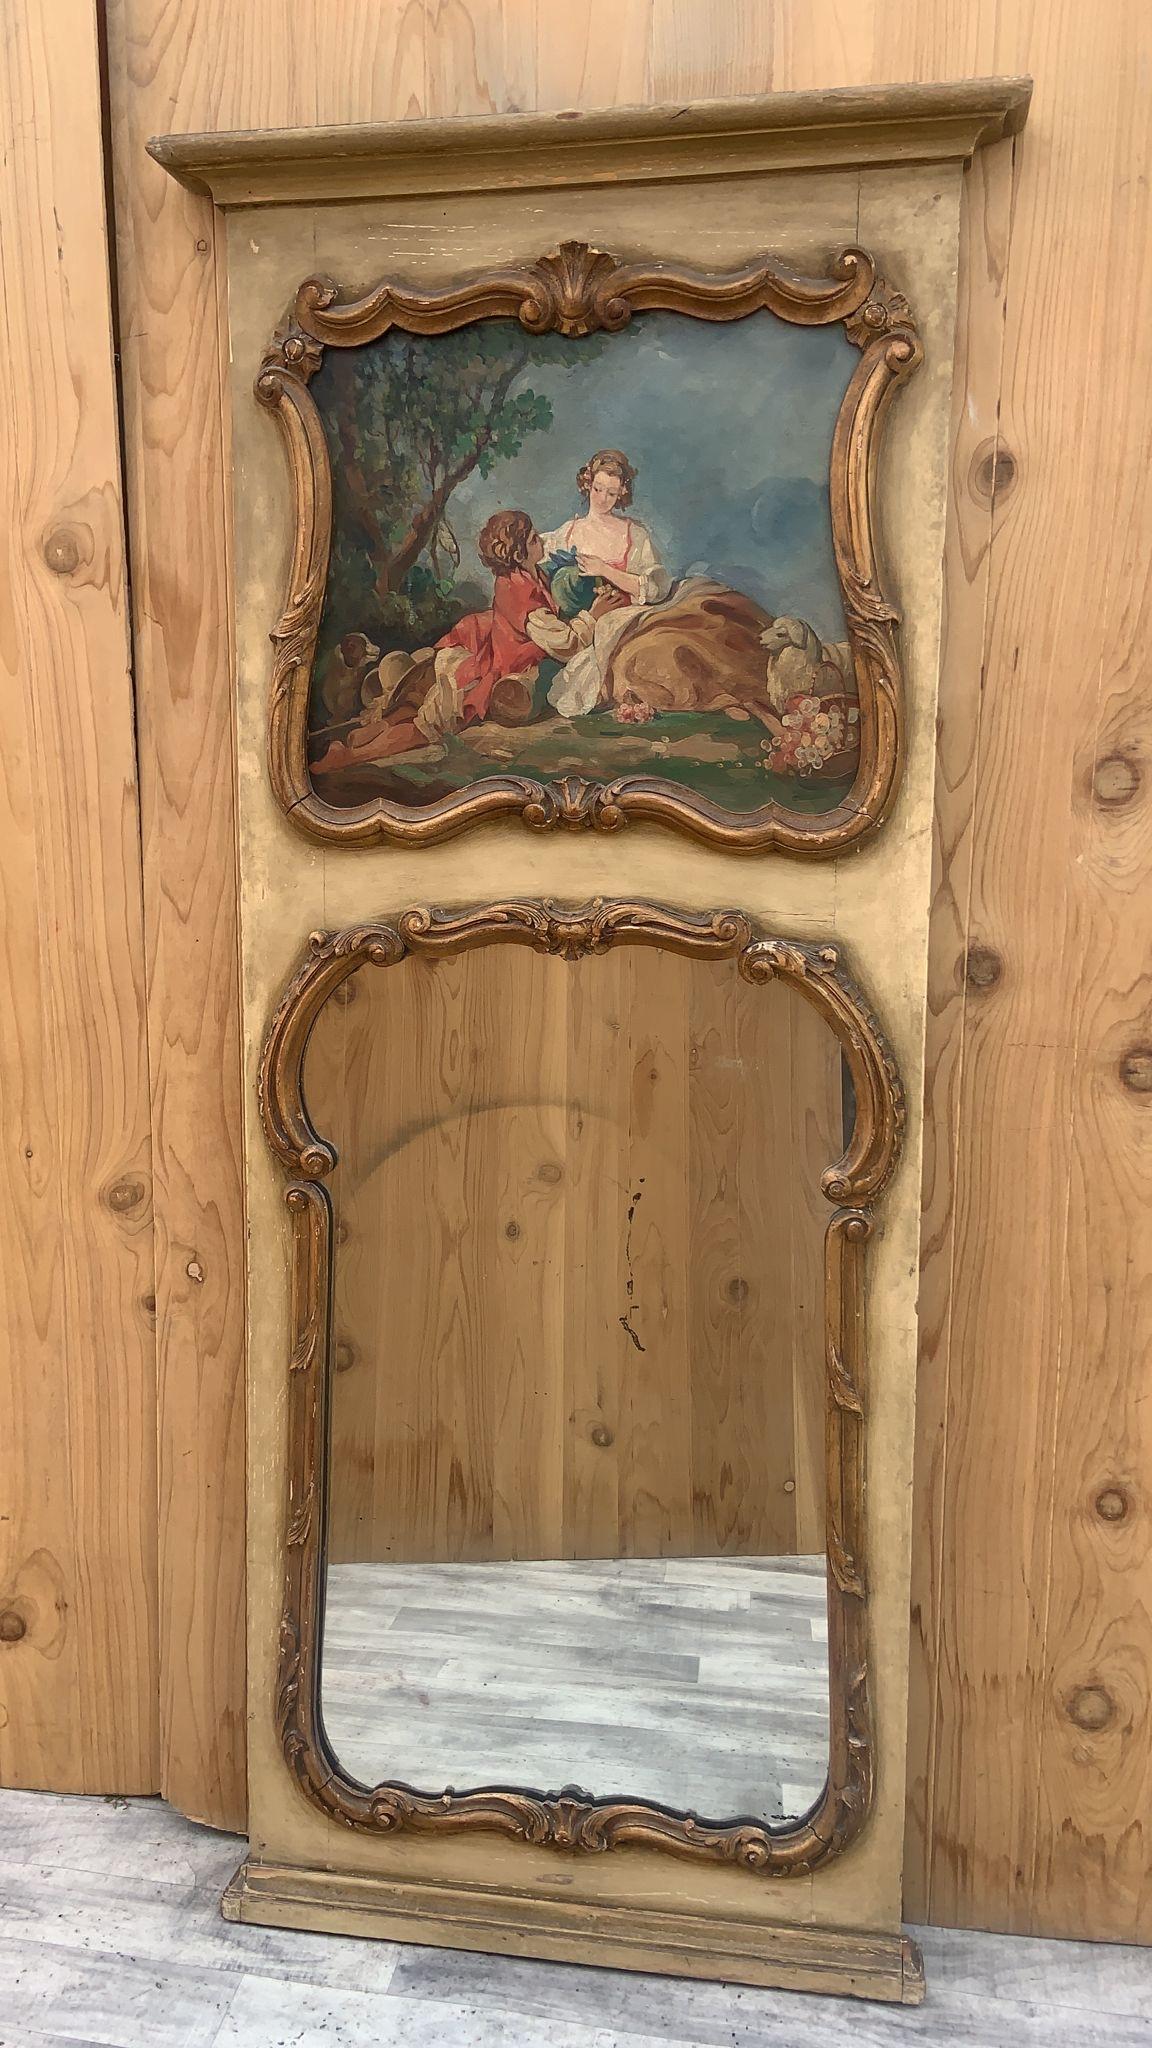 Antique French Trumeau Parcel Gilt Mirror with Painted Canvas 

This beautiful late 1800s French Trumeau Parcel-Gilt Wall/Mantel Mirror has an oil painting that is a romantic hillside picnic scene. Beautiful antique French imported piece sure to